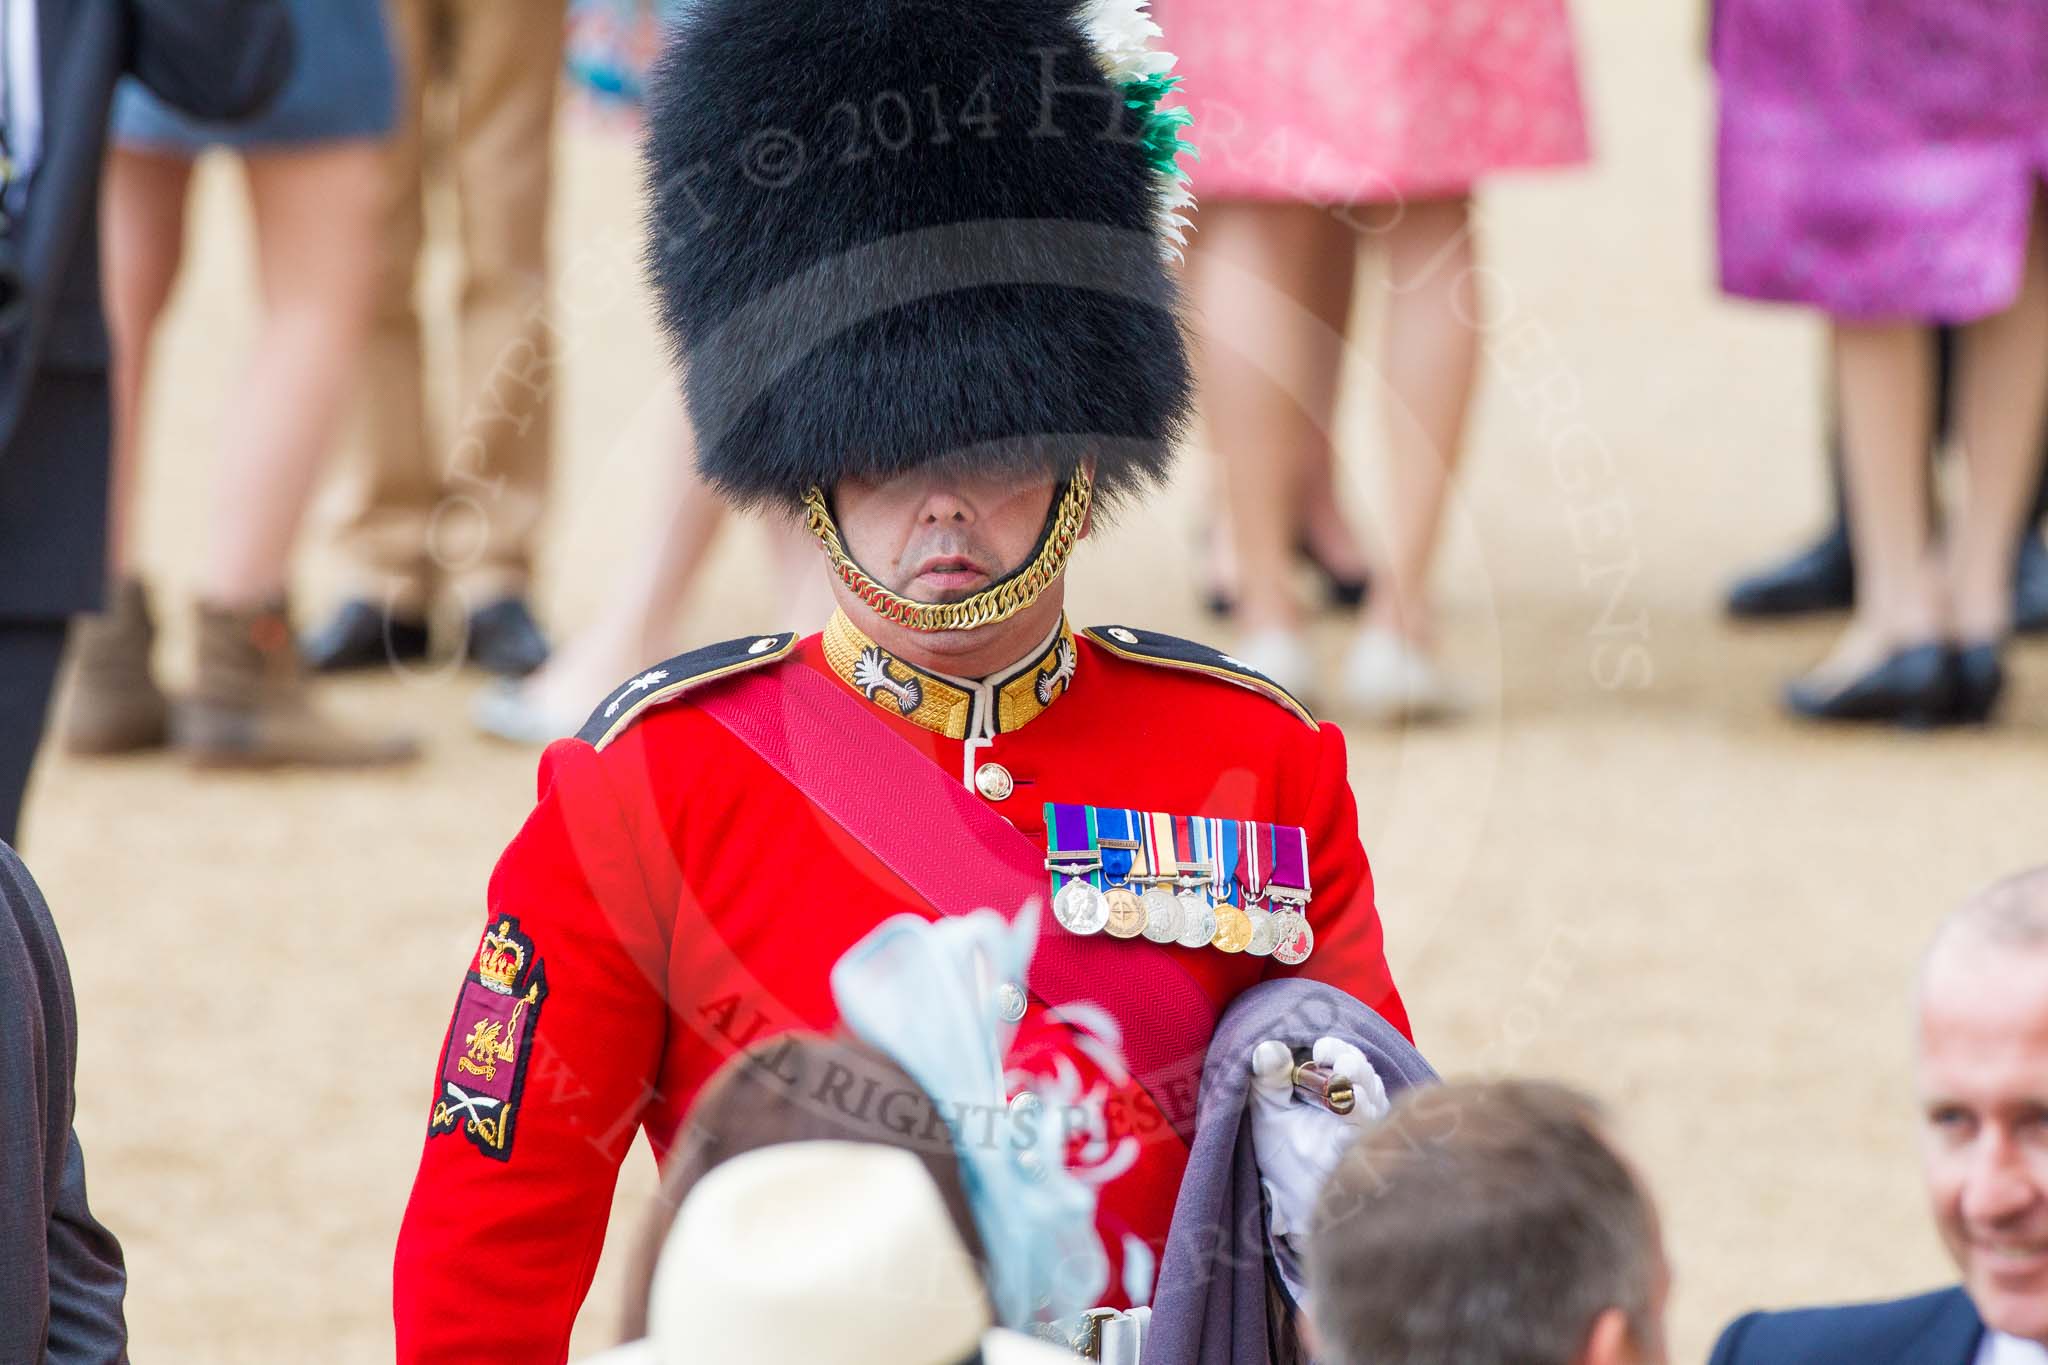 Trooping the Colour 2014.
Horse Guards Parade, Westminster,
London SW1A,

United Kingdom,
on 14 June 2014 at 12:29, image #959